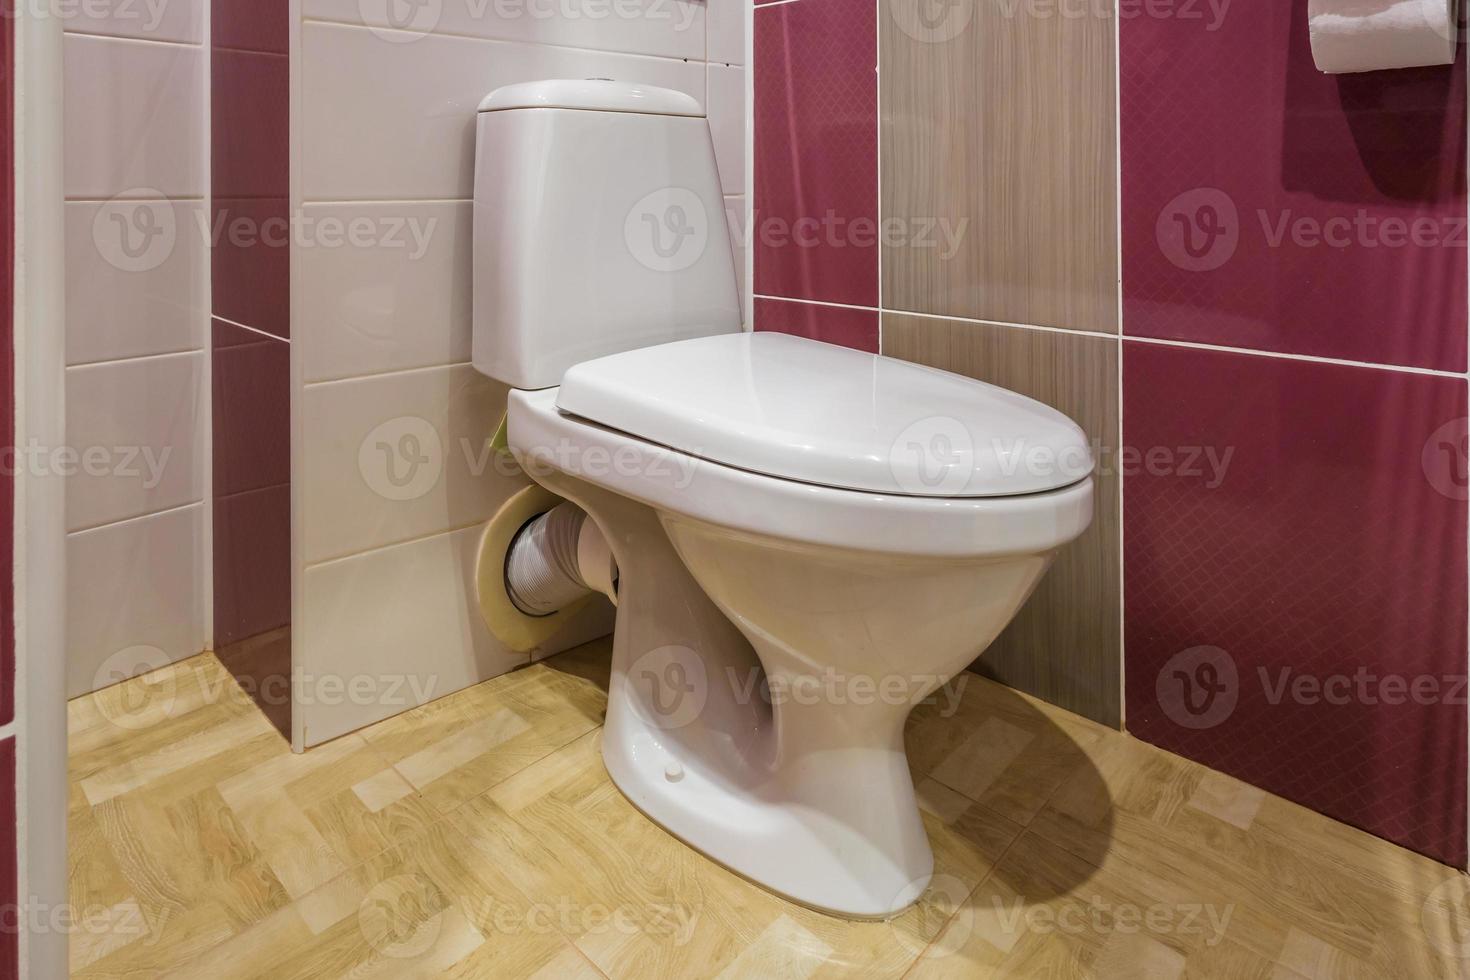 toilet and detail of a corner shower bidet with wall mount shower attachment photo